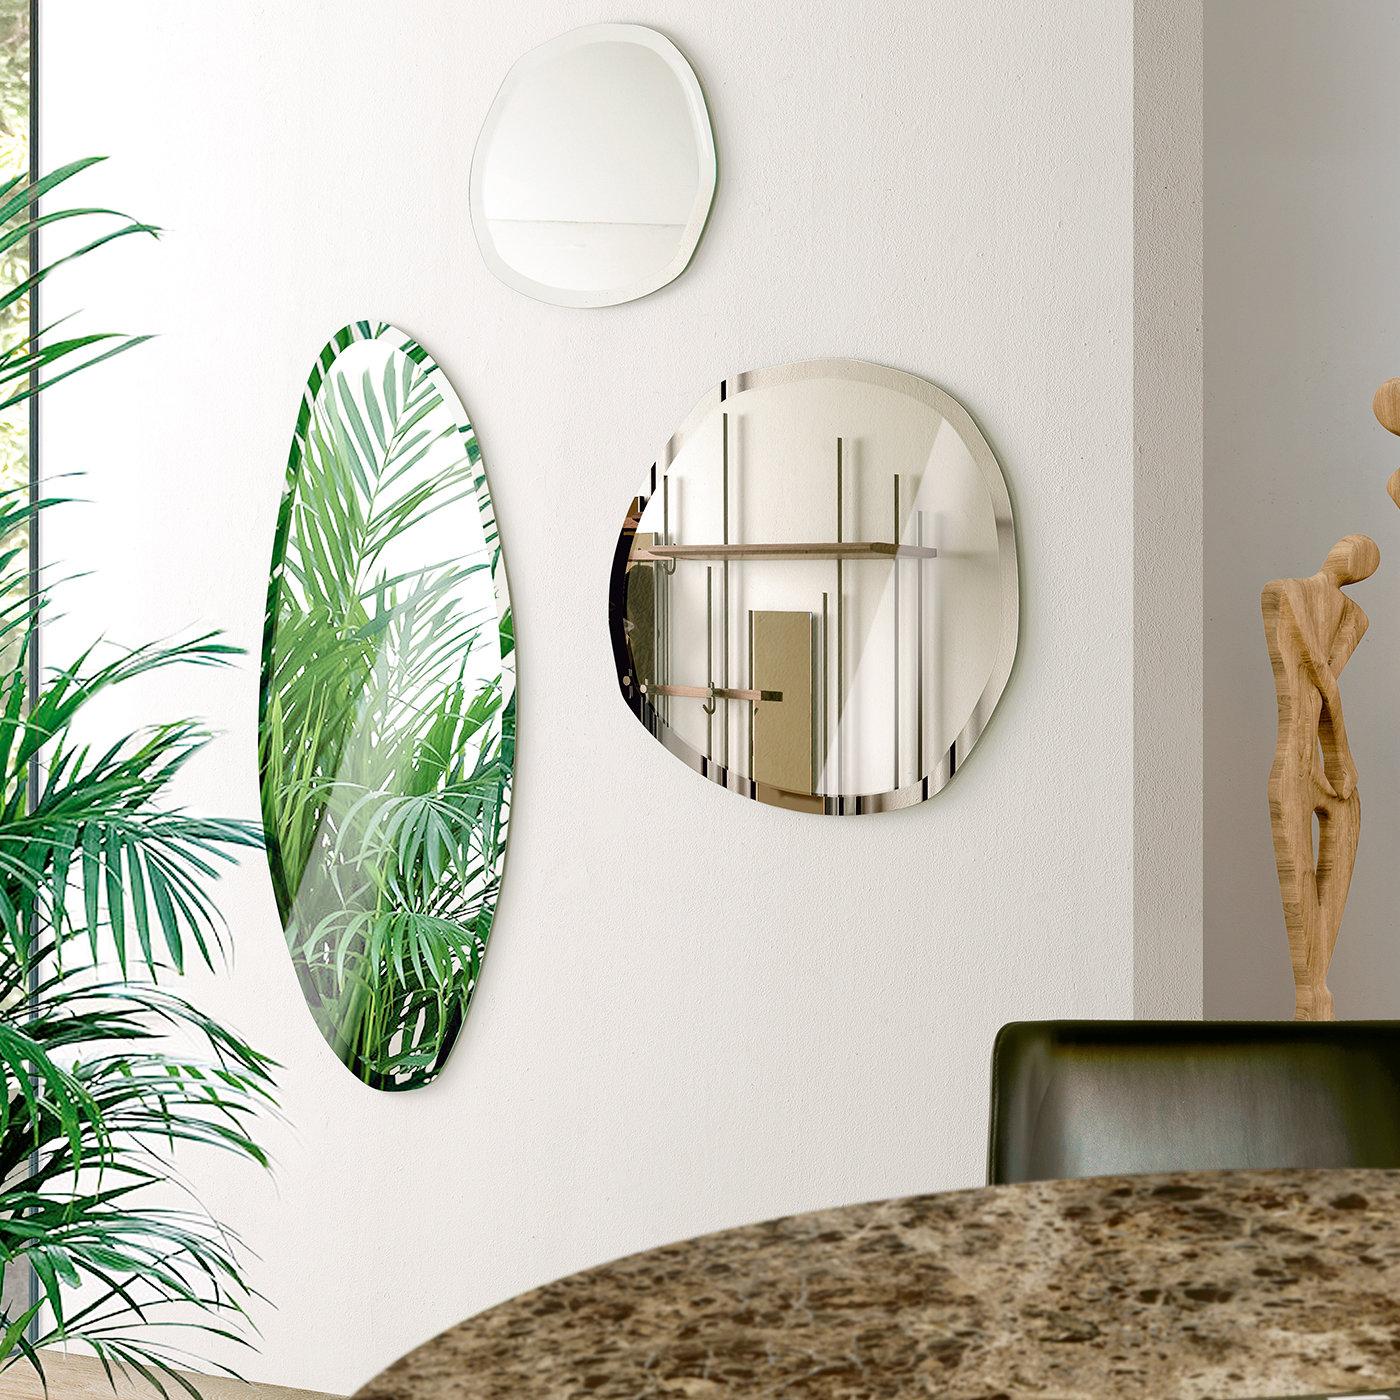 Suggestively evoking the allure of natural stone, this striking wall mirror by Norberto Delfinetti is certainly a one-of-a-kind object of functional decor that will stand out in any refined, modern interior. The glass is available in both natural or